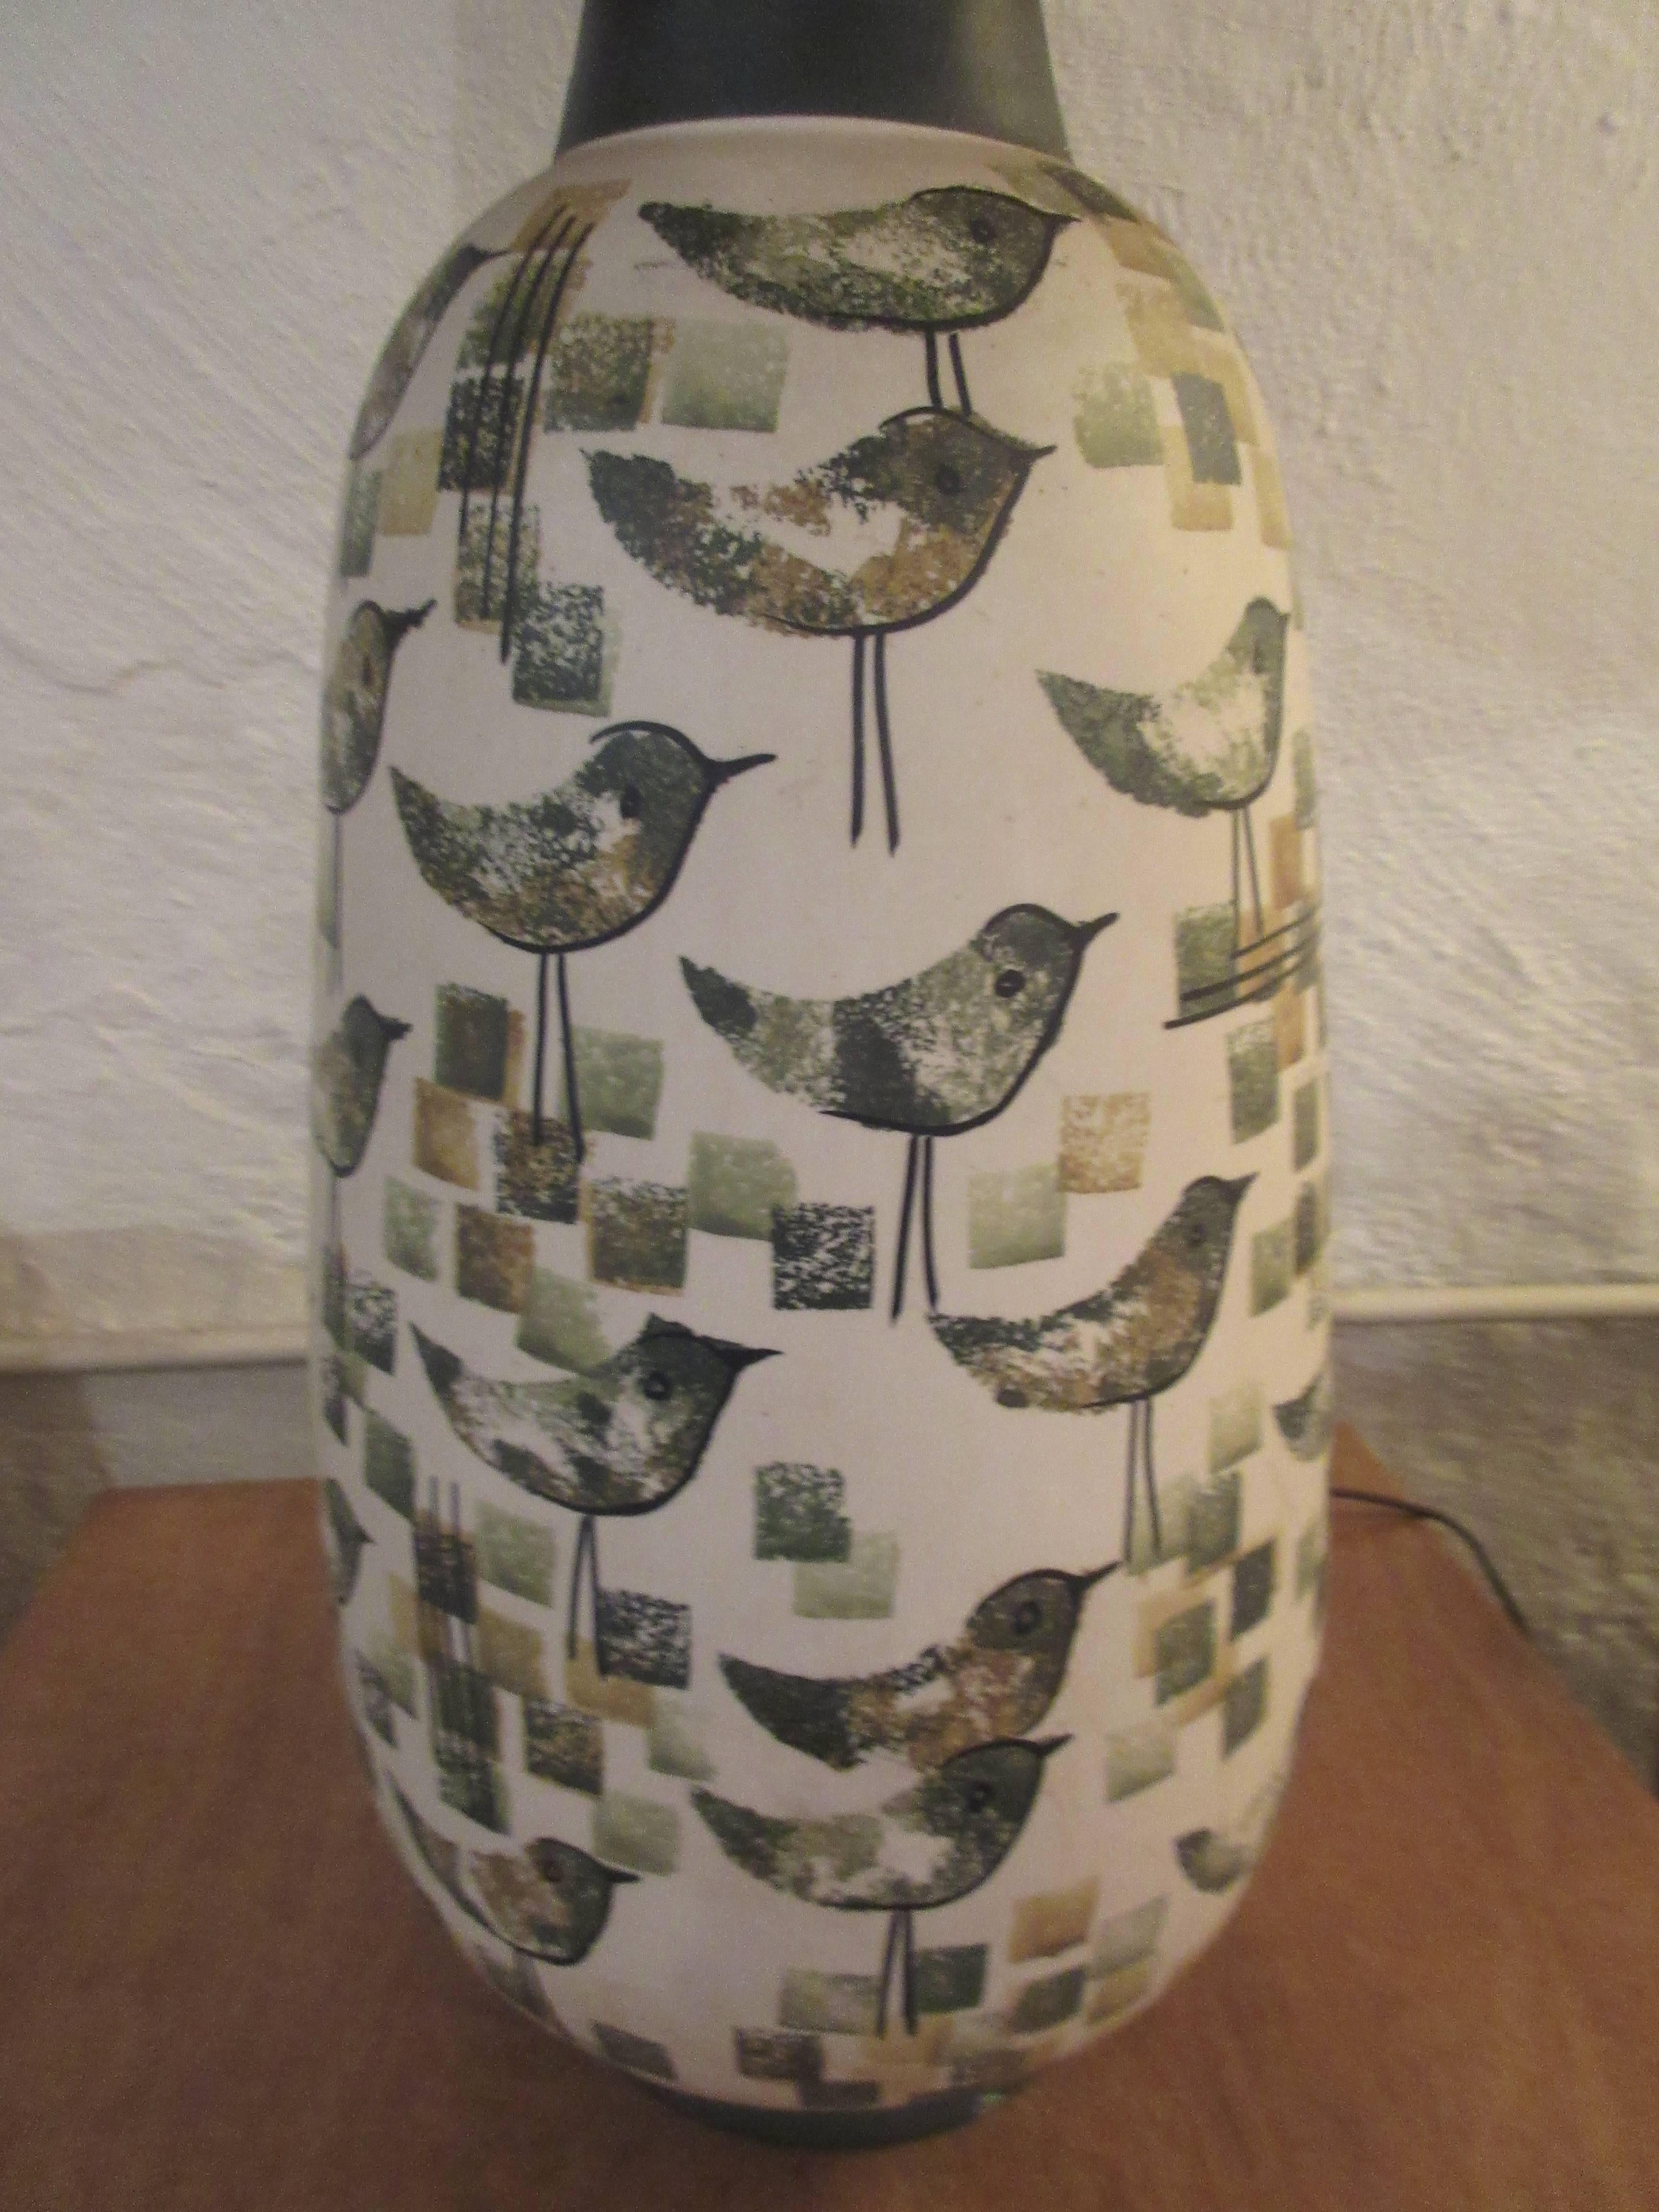 Charming lamp in shades of olive with under the glaze 